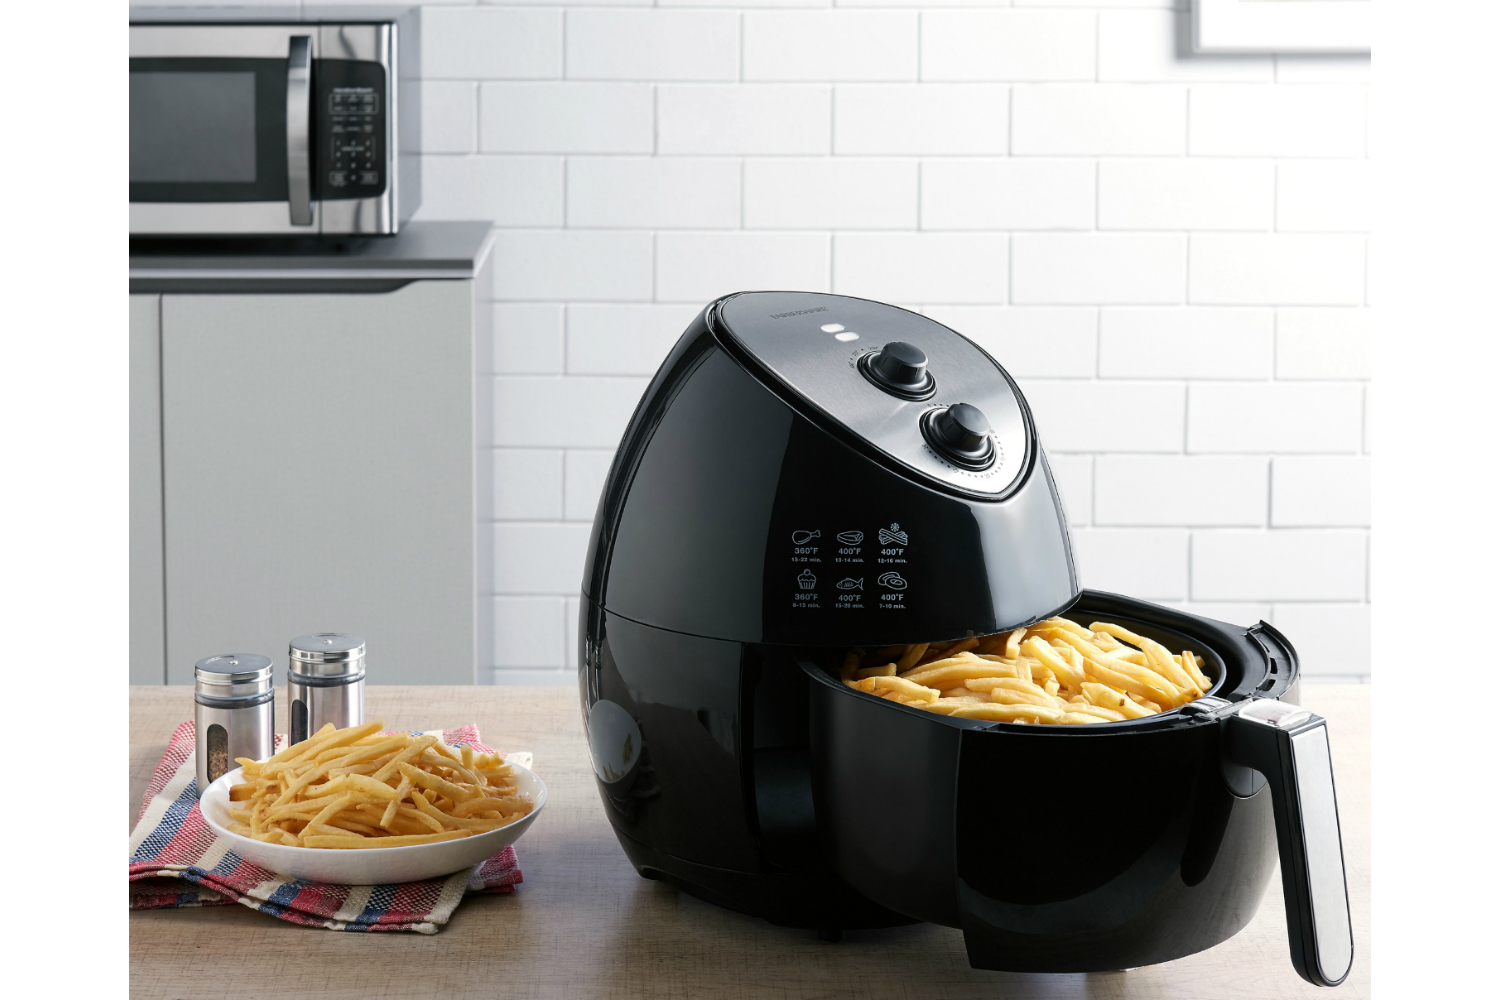 Save $30 on a sleek new air fryer you can control with your phone or even  Alexa